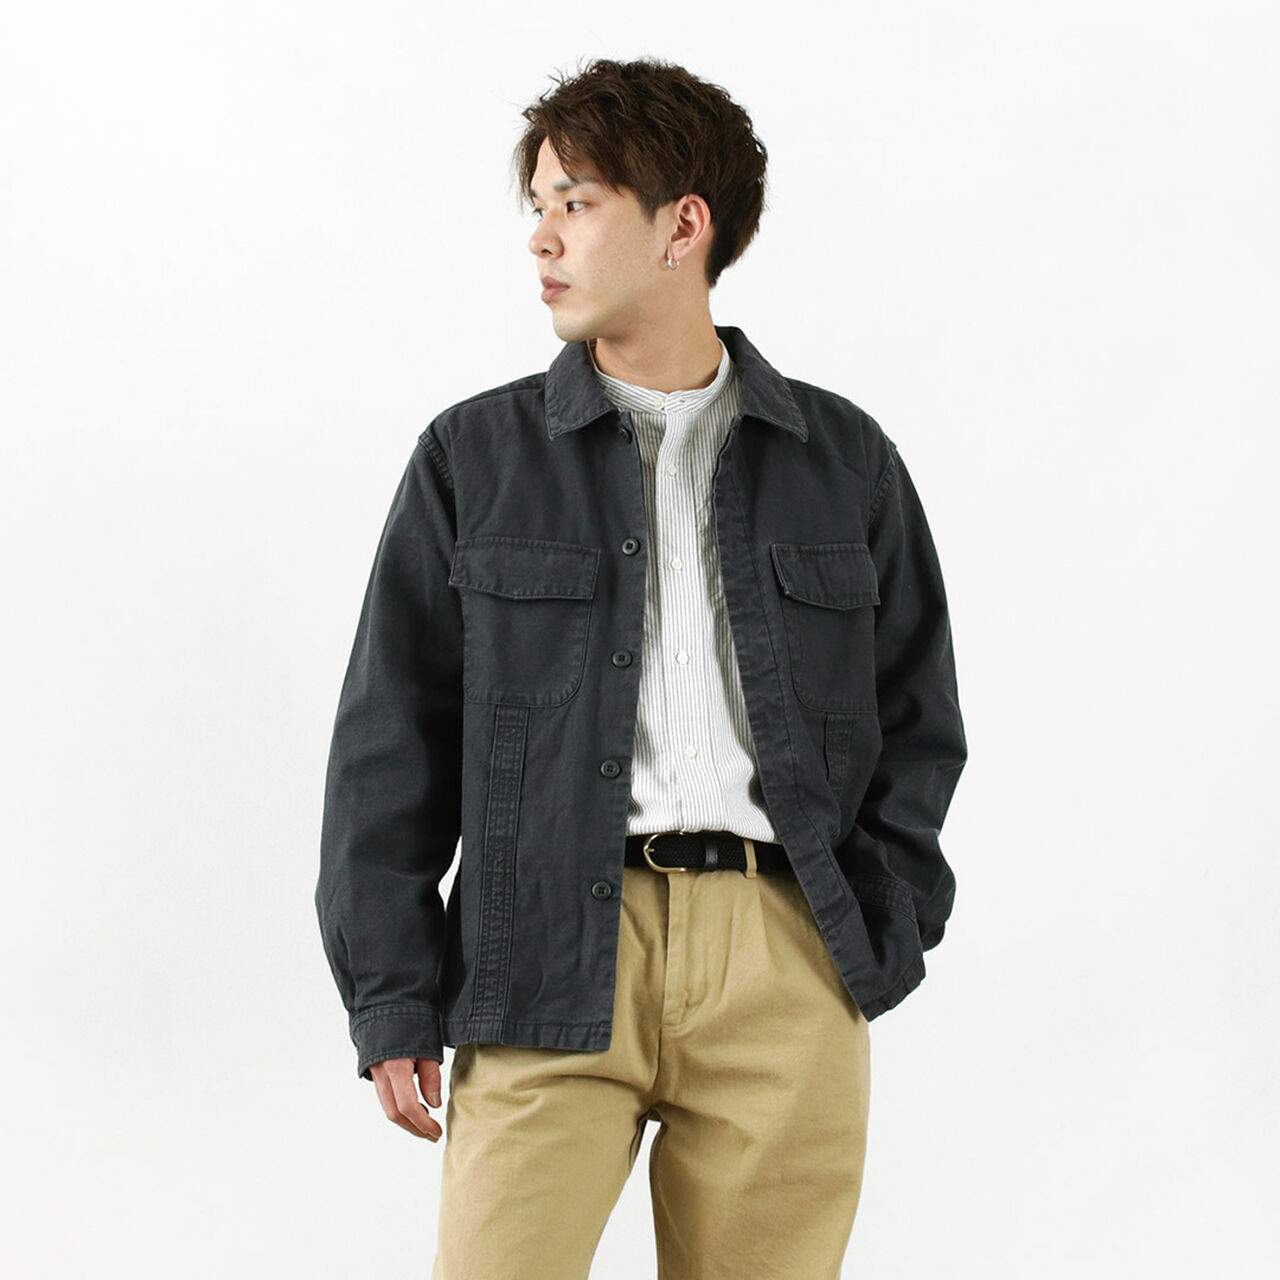 JAPAN BLUE JEANS CODE:SILVER / RJB4371S Military Fatigue Jacket